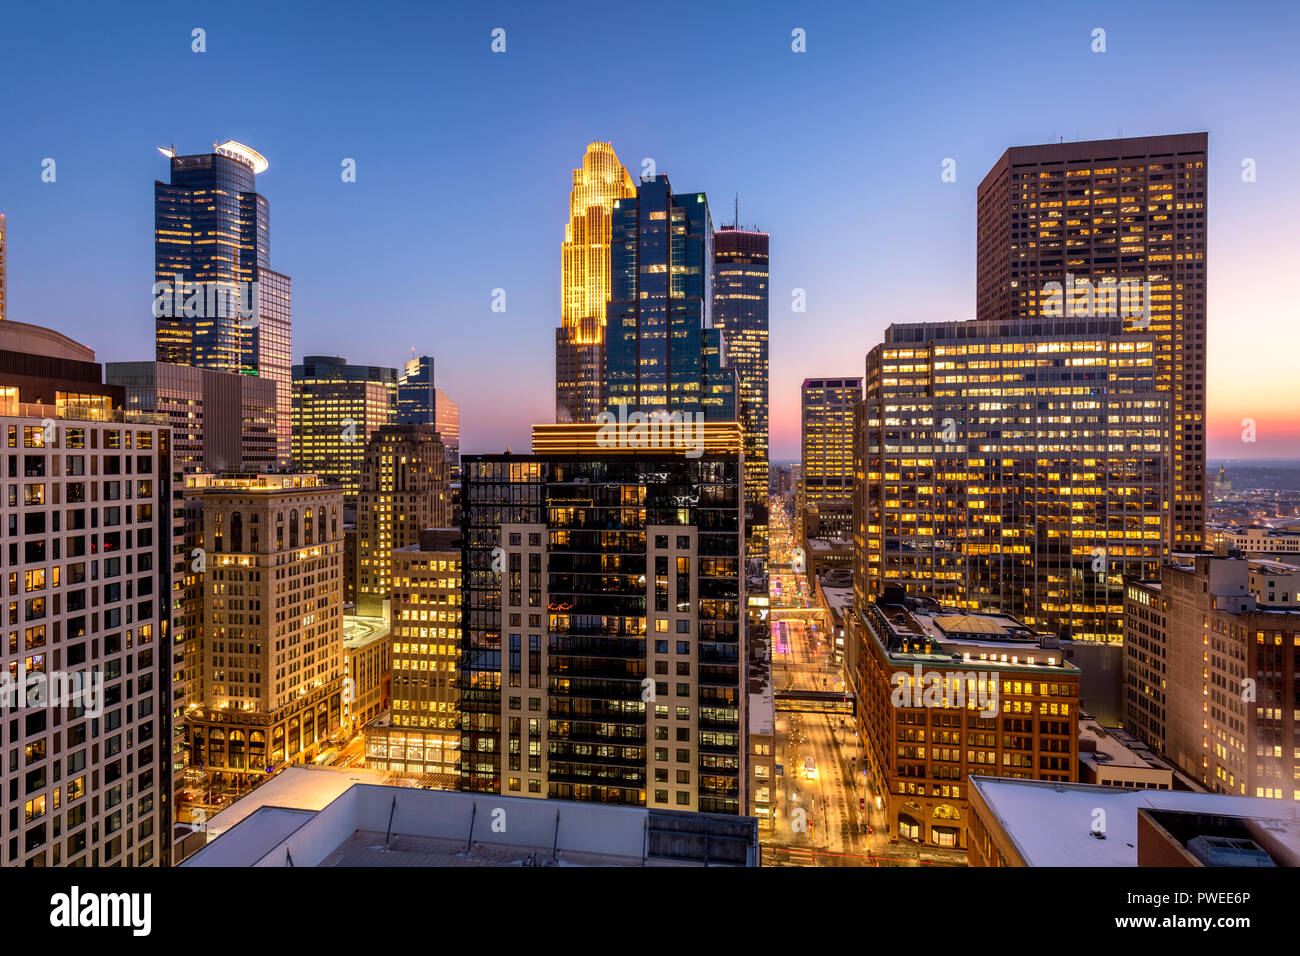 Minneapolis, Minnesota skyline at dusk as seen from the 30th floor of the 365 Nicollet apartment tower. Stock Photo